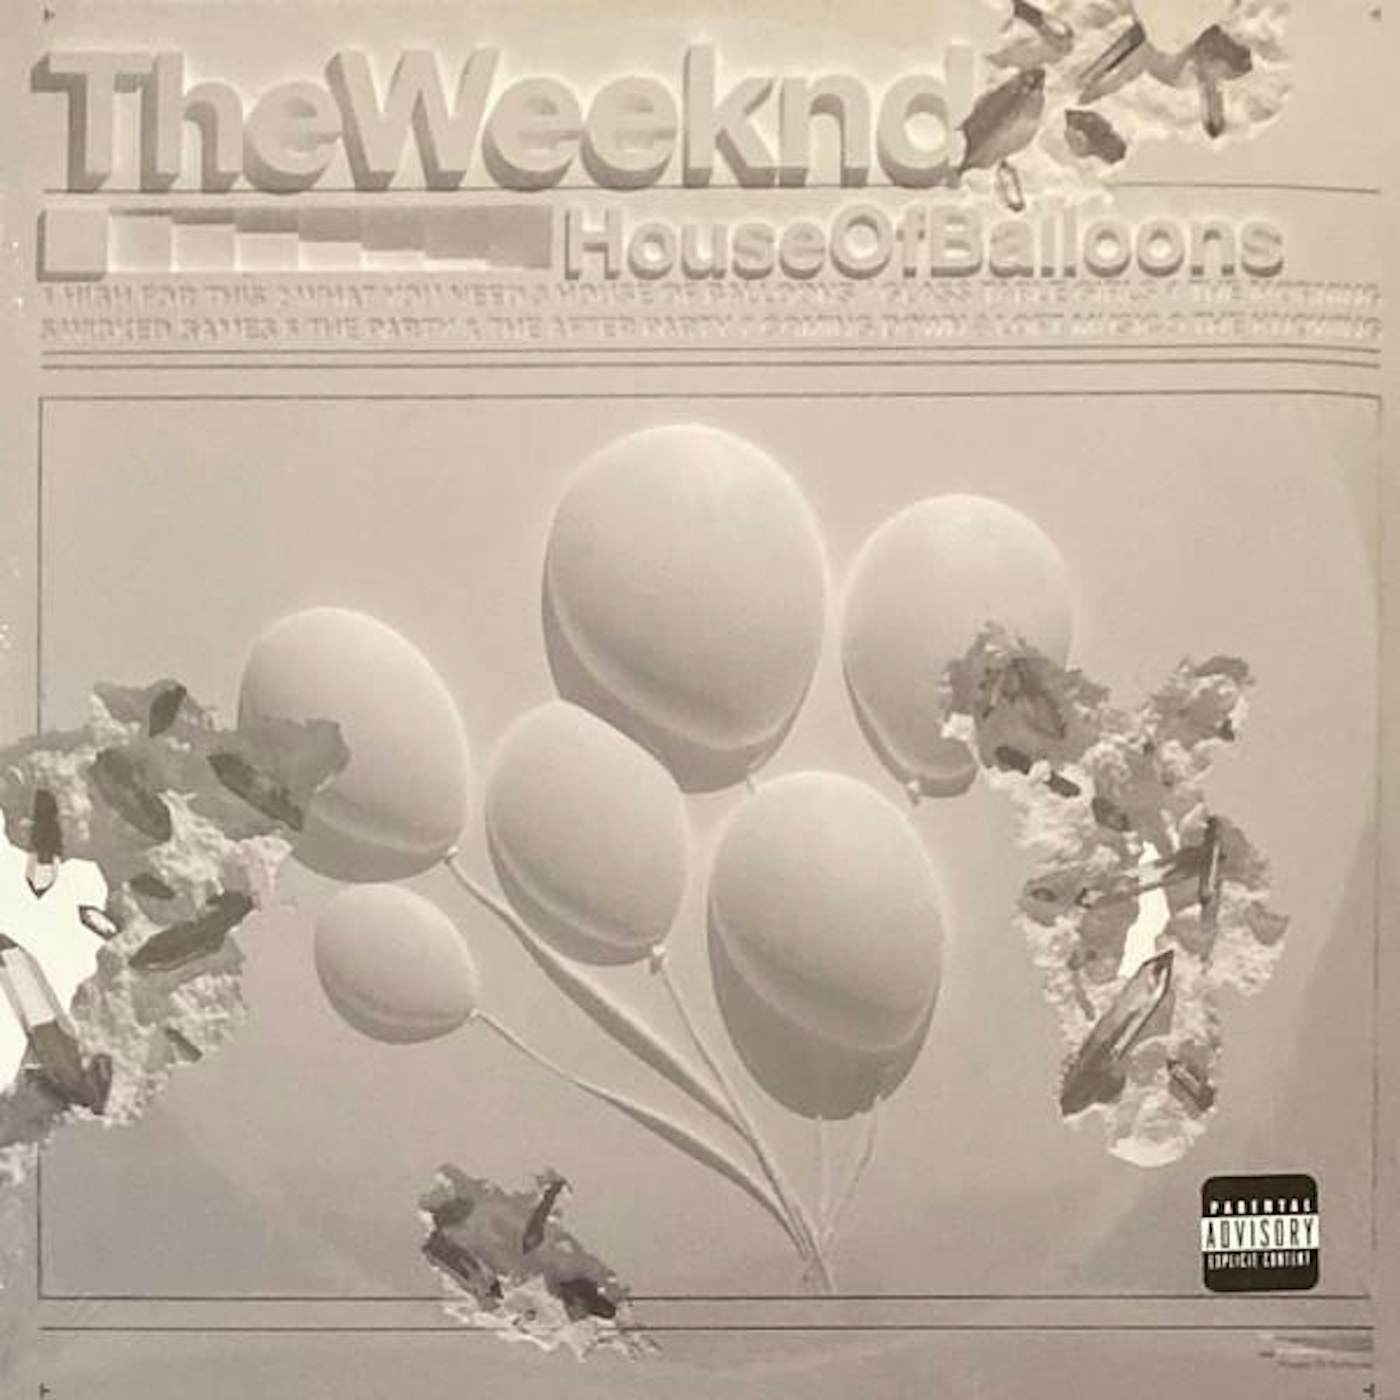 The Weeknd House of Balloons 2LP Vinyl Limited Black 12 Record 